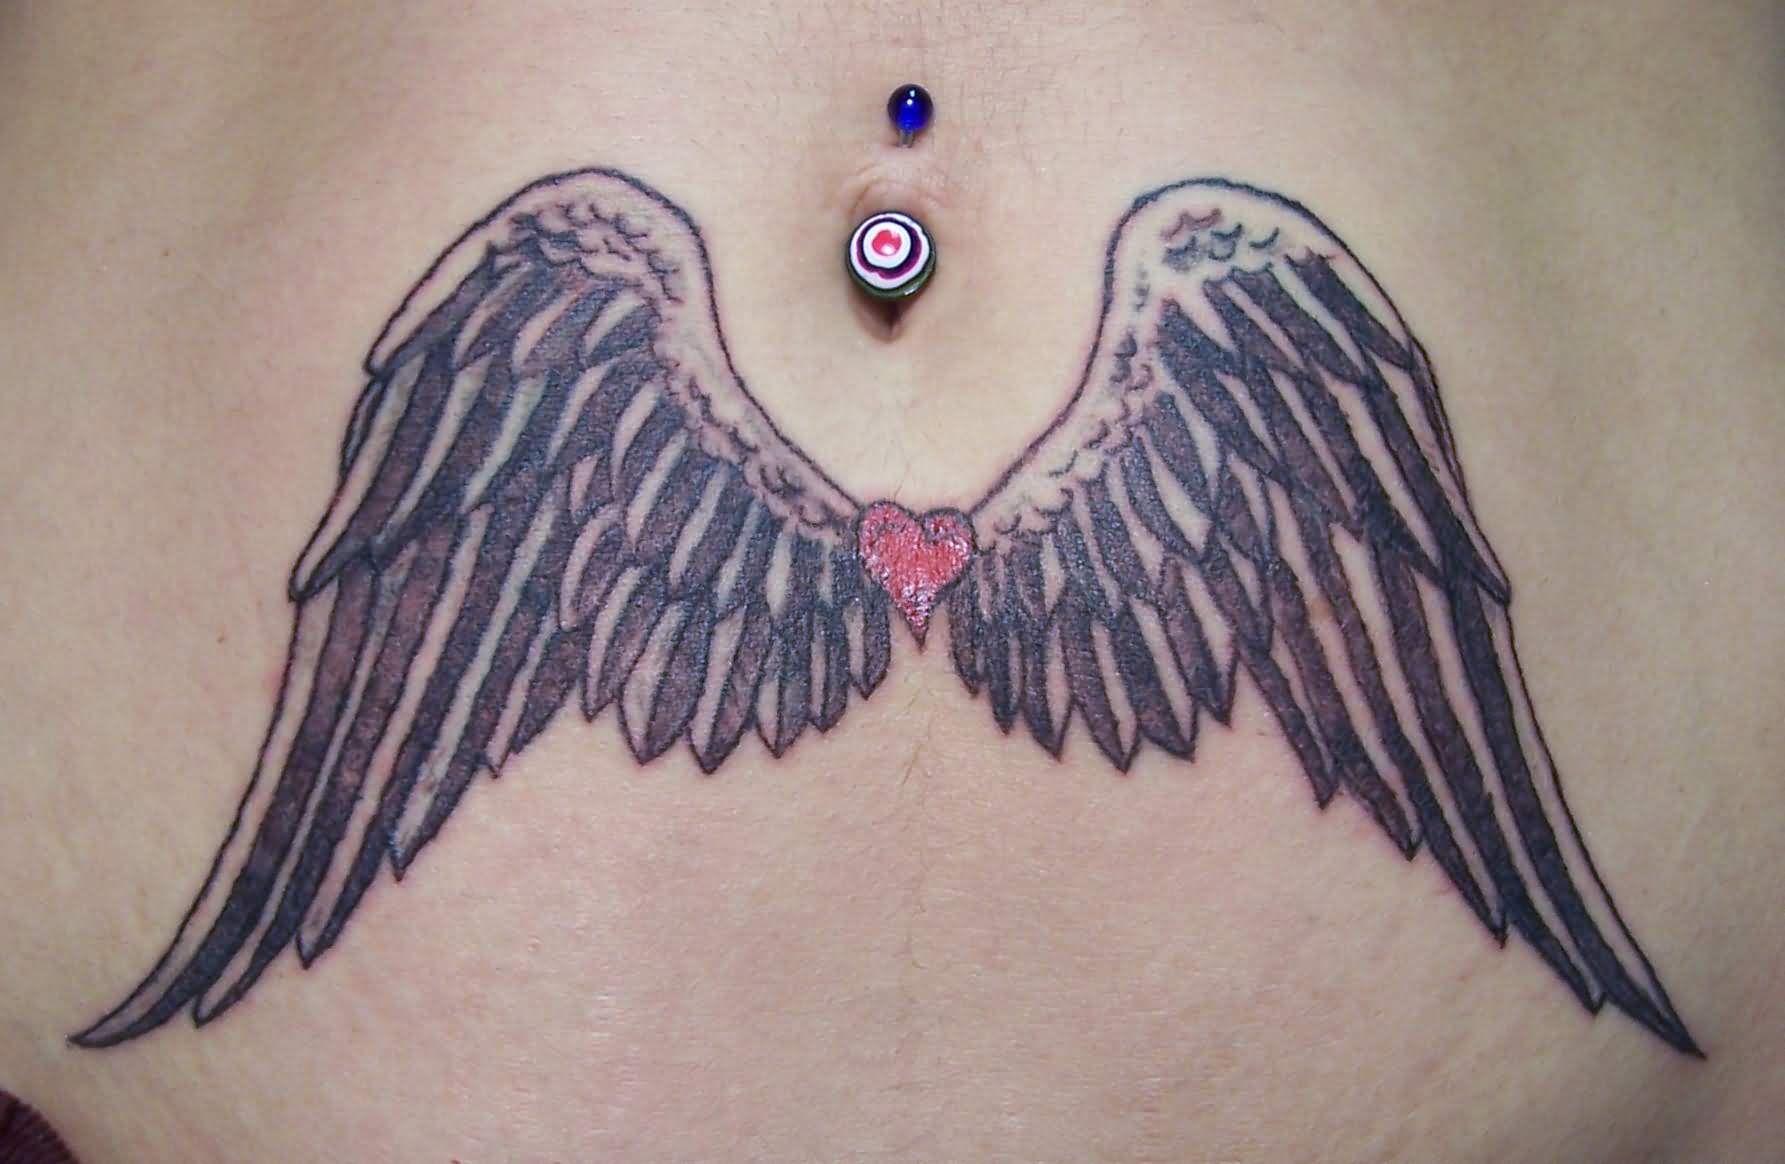 Little Heart With Wings Tattoo On Belly